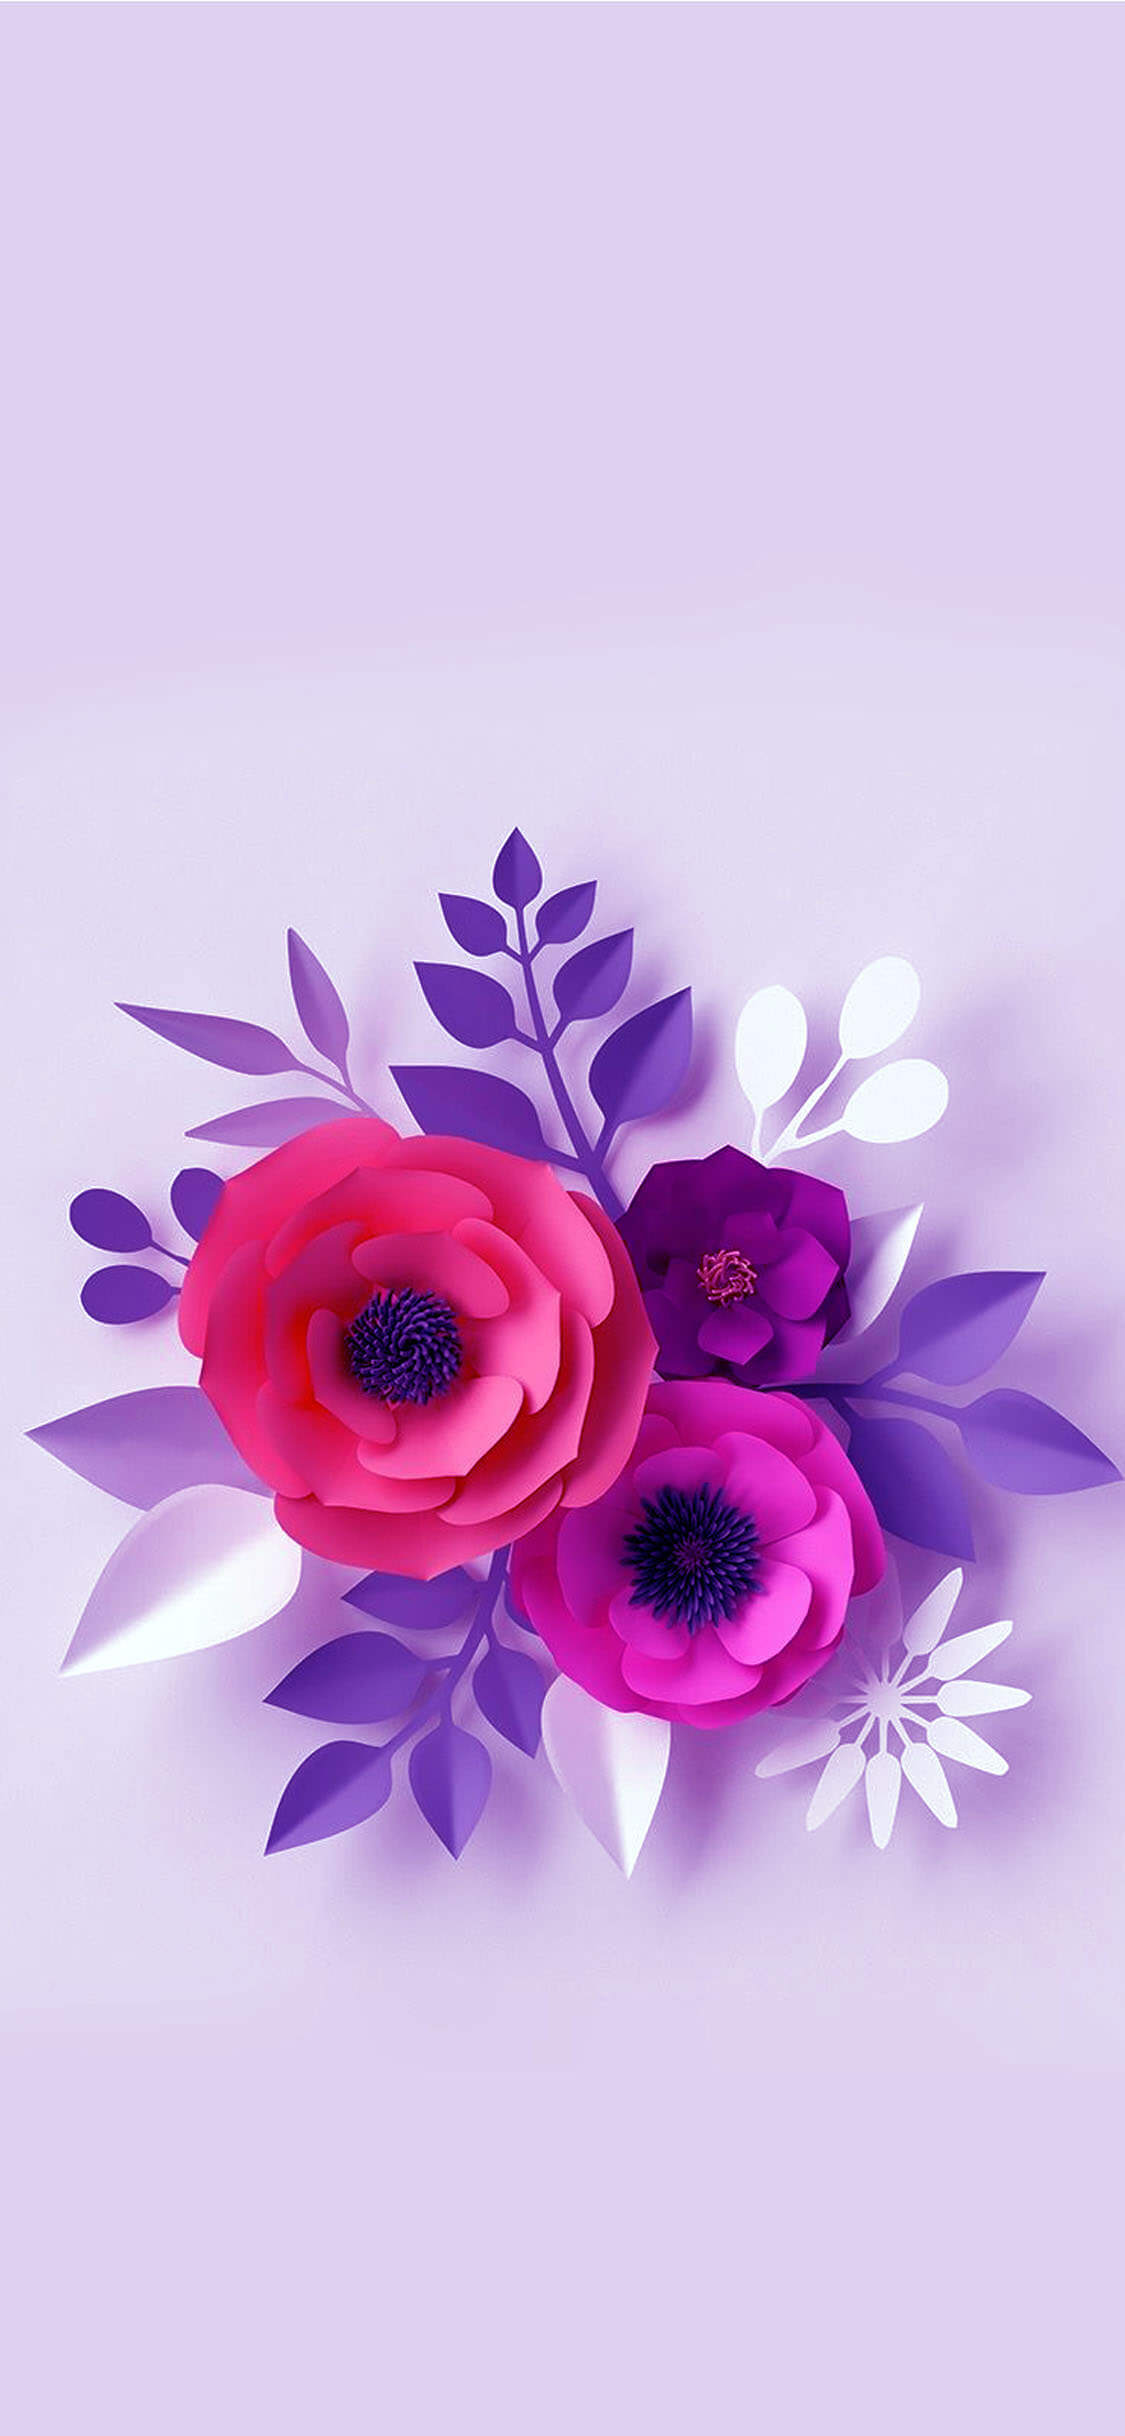 28+ Best Flowers iPhone Wallpapers & Backgrounds Templatefor